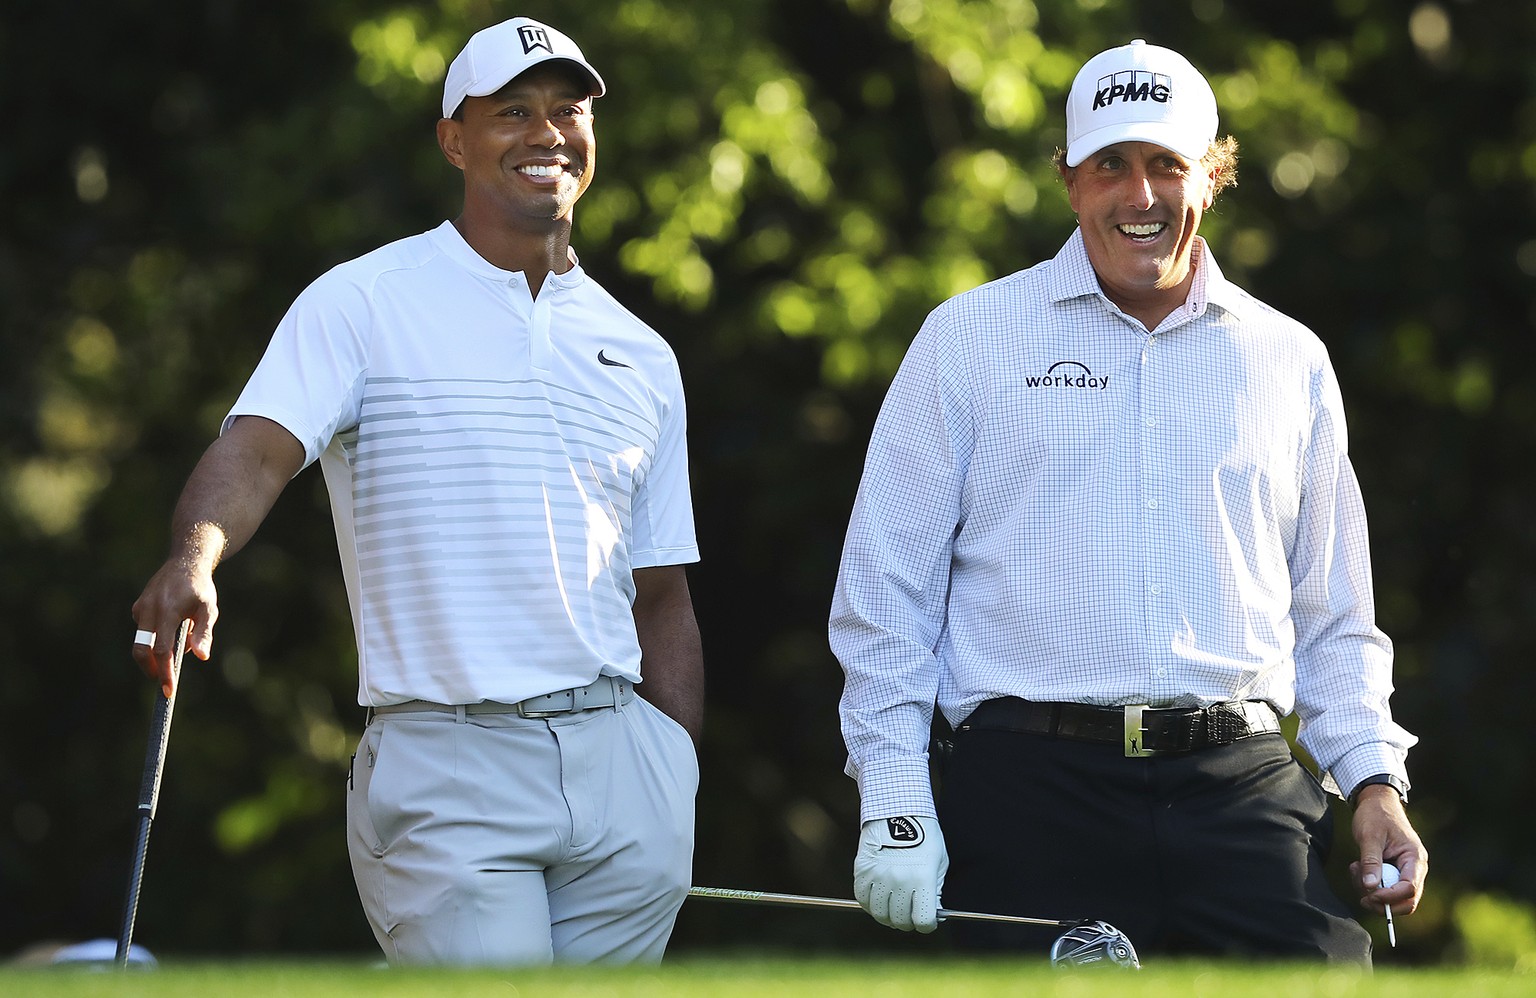 Tiger Woods, left, and Phil Mickelson share a laugh on the 11th tee box while playing a practice round for the Masters golf tournament at Augusta National Golf Club in Augusta, Ga., Tuesday, April 3,  ...